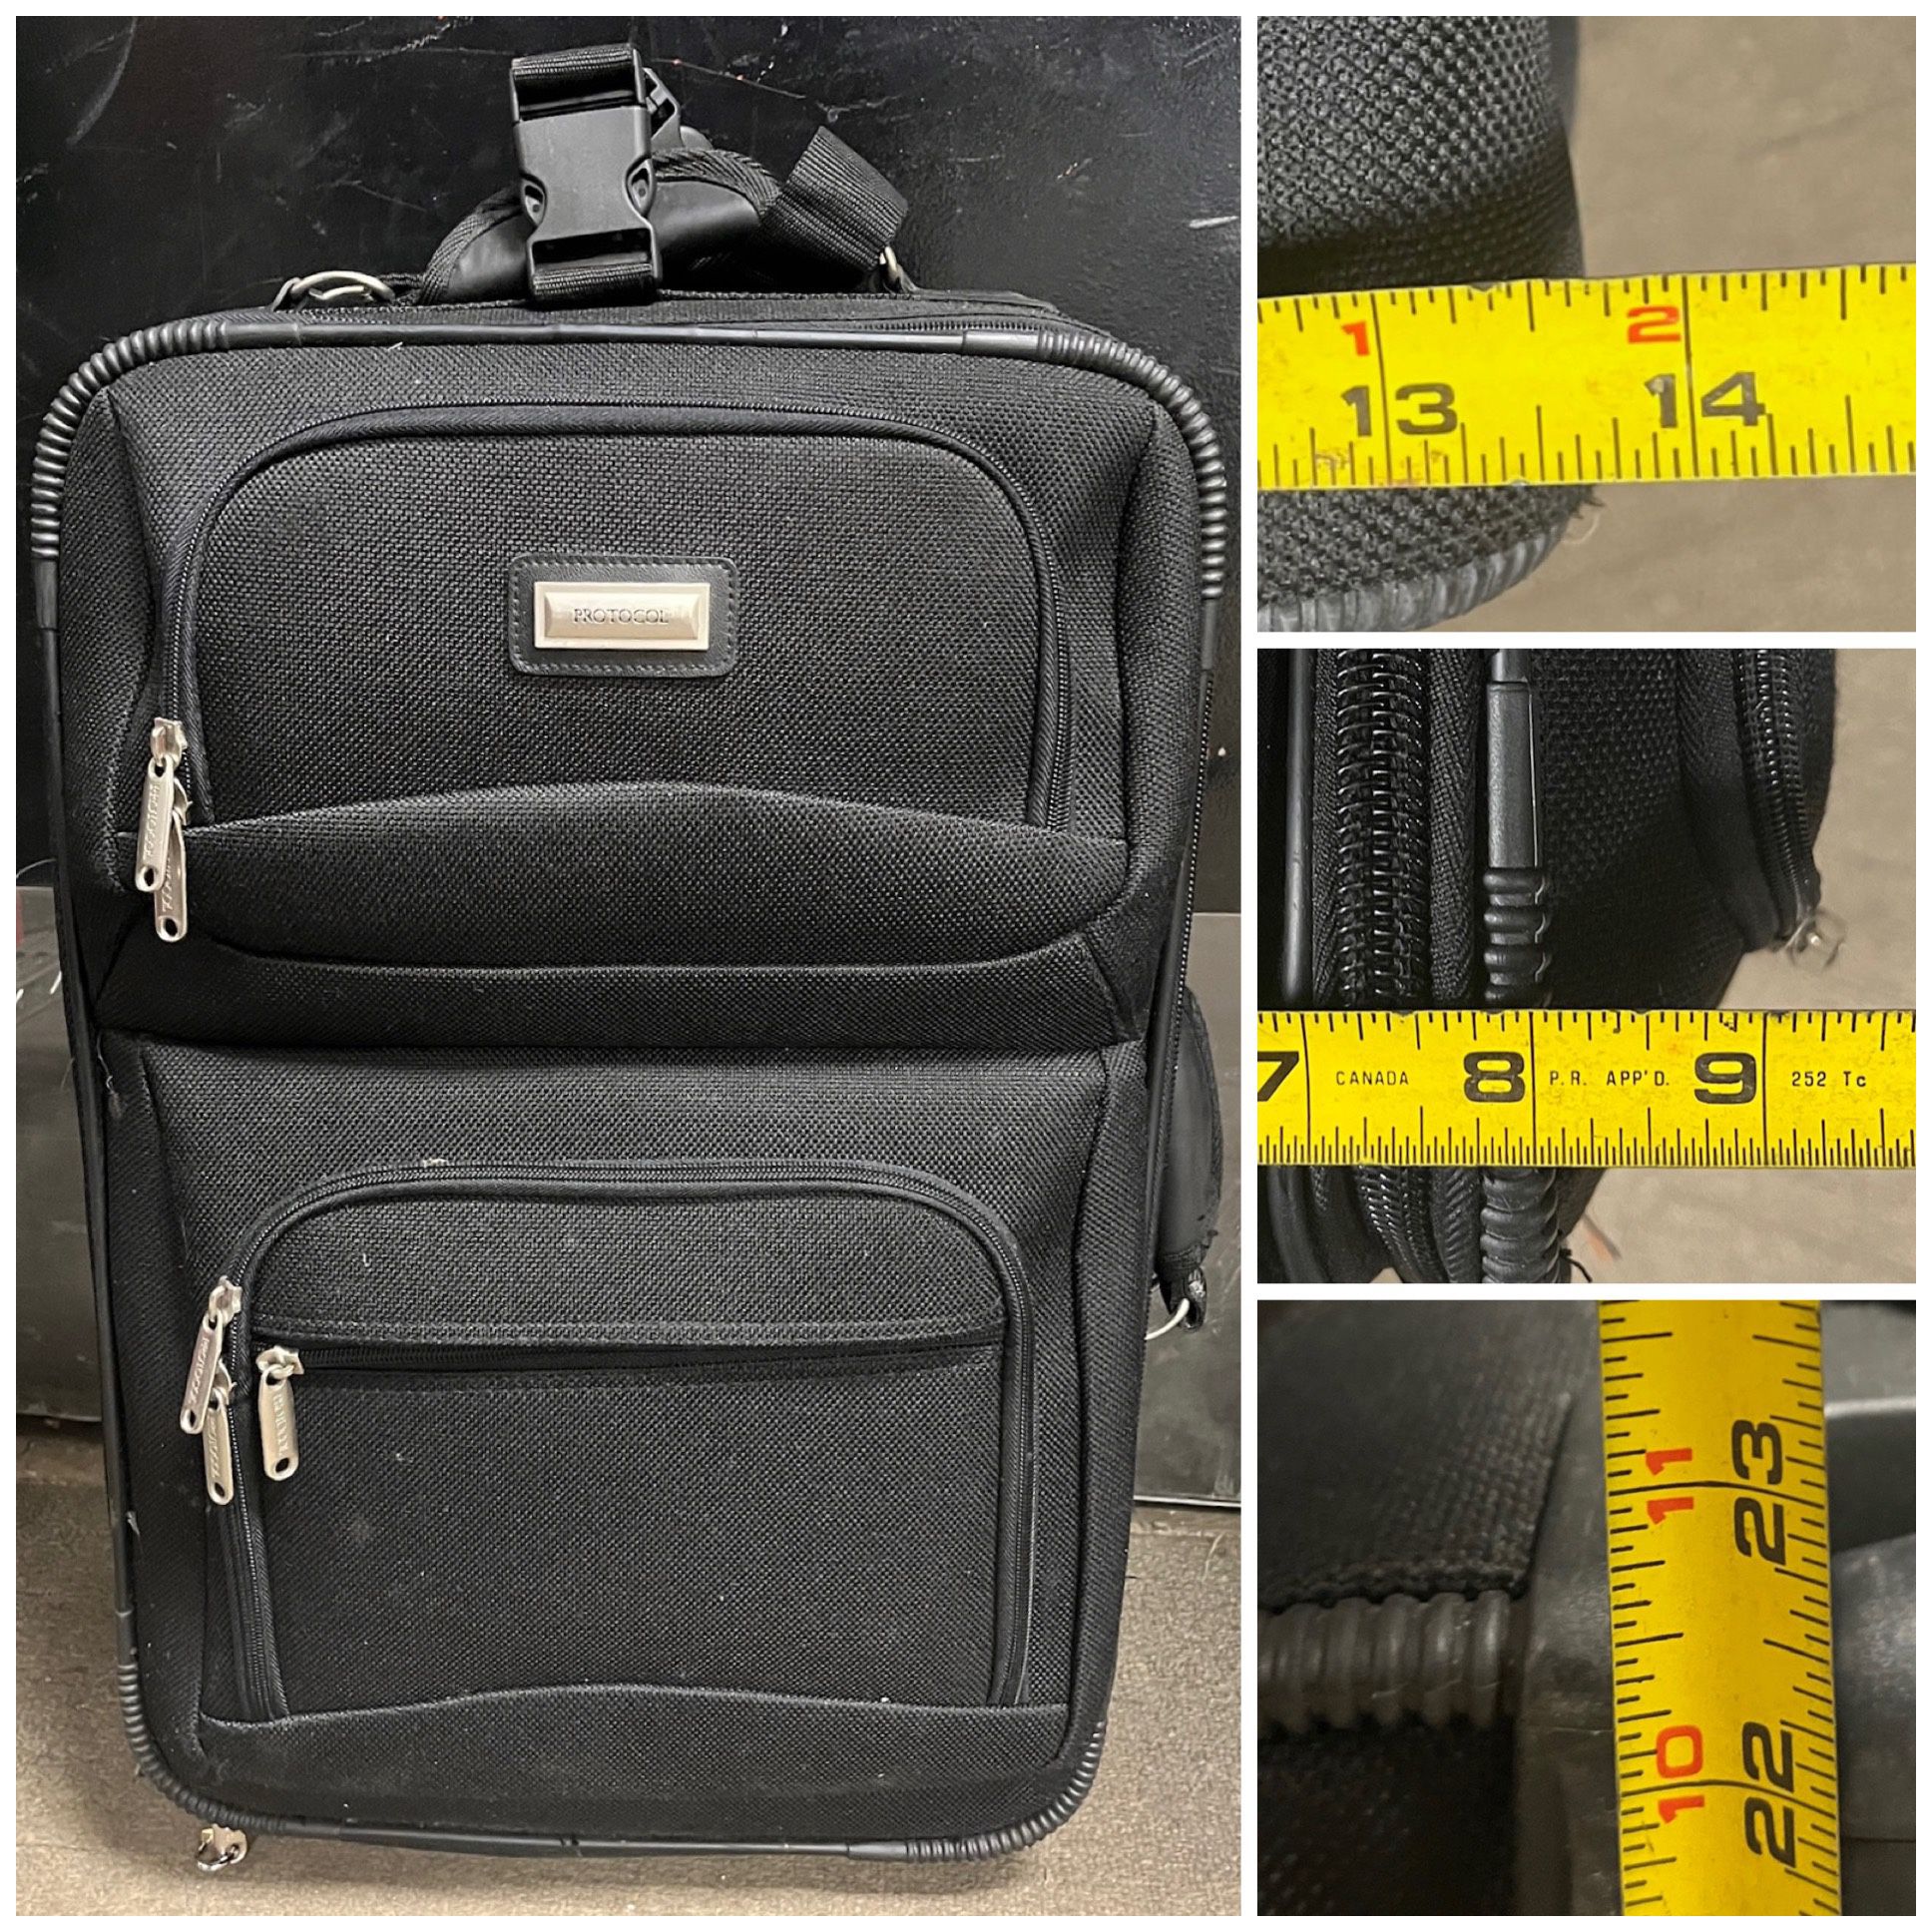 Protocol Rolling Carry On Suitcase. Ask Me About the Matching Suitcase